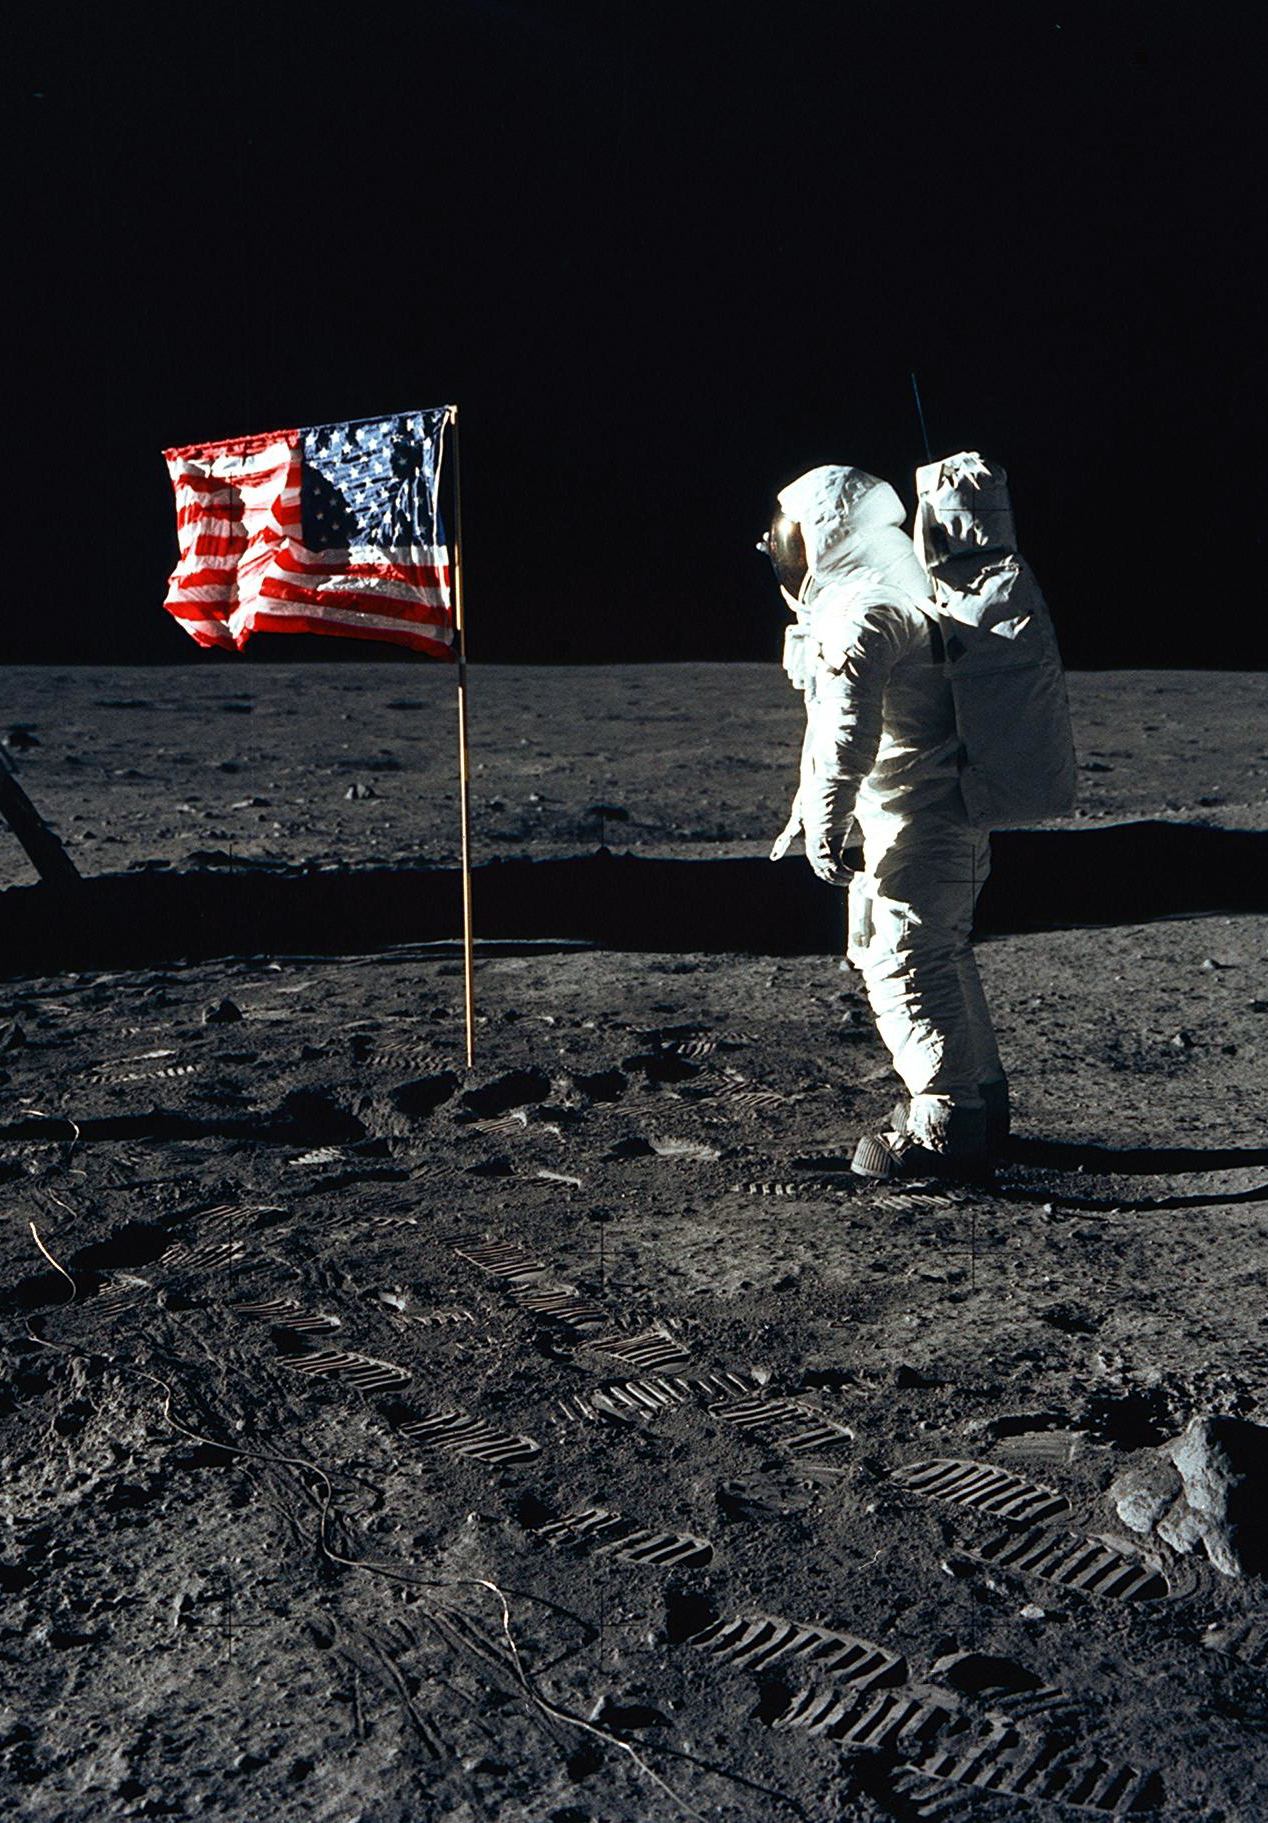 Astronaut Buzz Aldrin stands next to the US flag on the moon during the Apollo 11 mission. The lunar module is to the left, with distinct astronaut footprints in the moon's soil. Photo taken by mission commander, Neil A. Armstrong, using a 70mm Hasselblad camera.